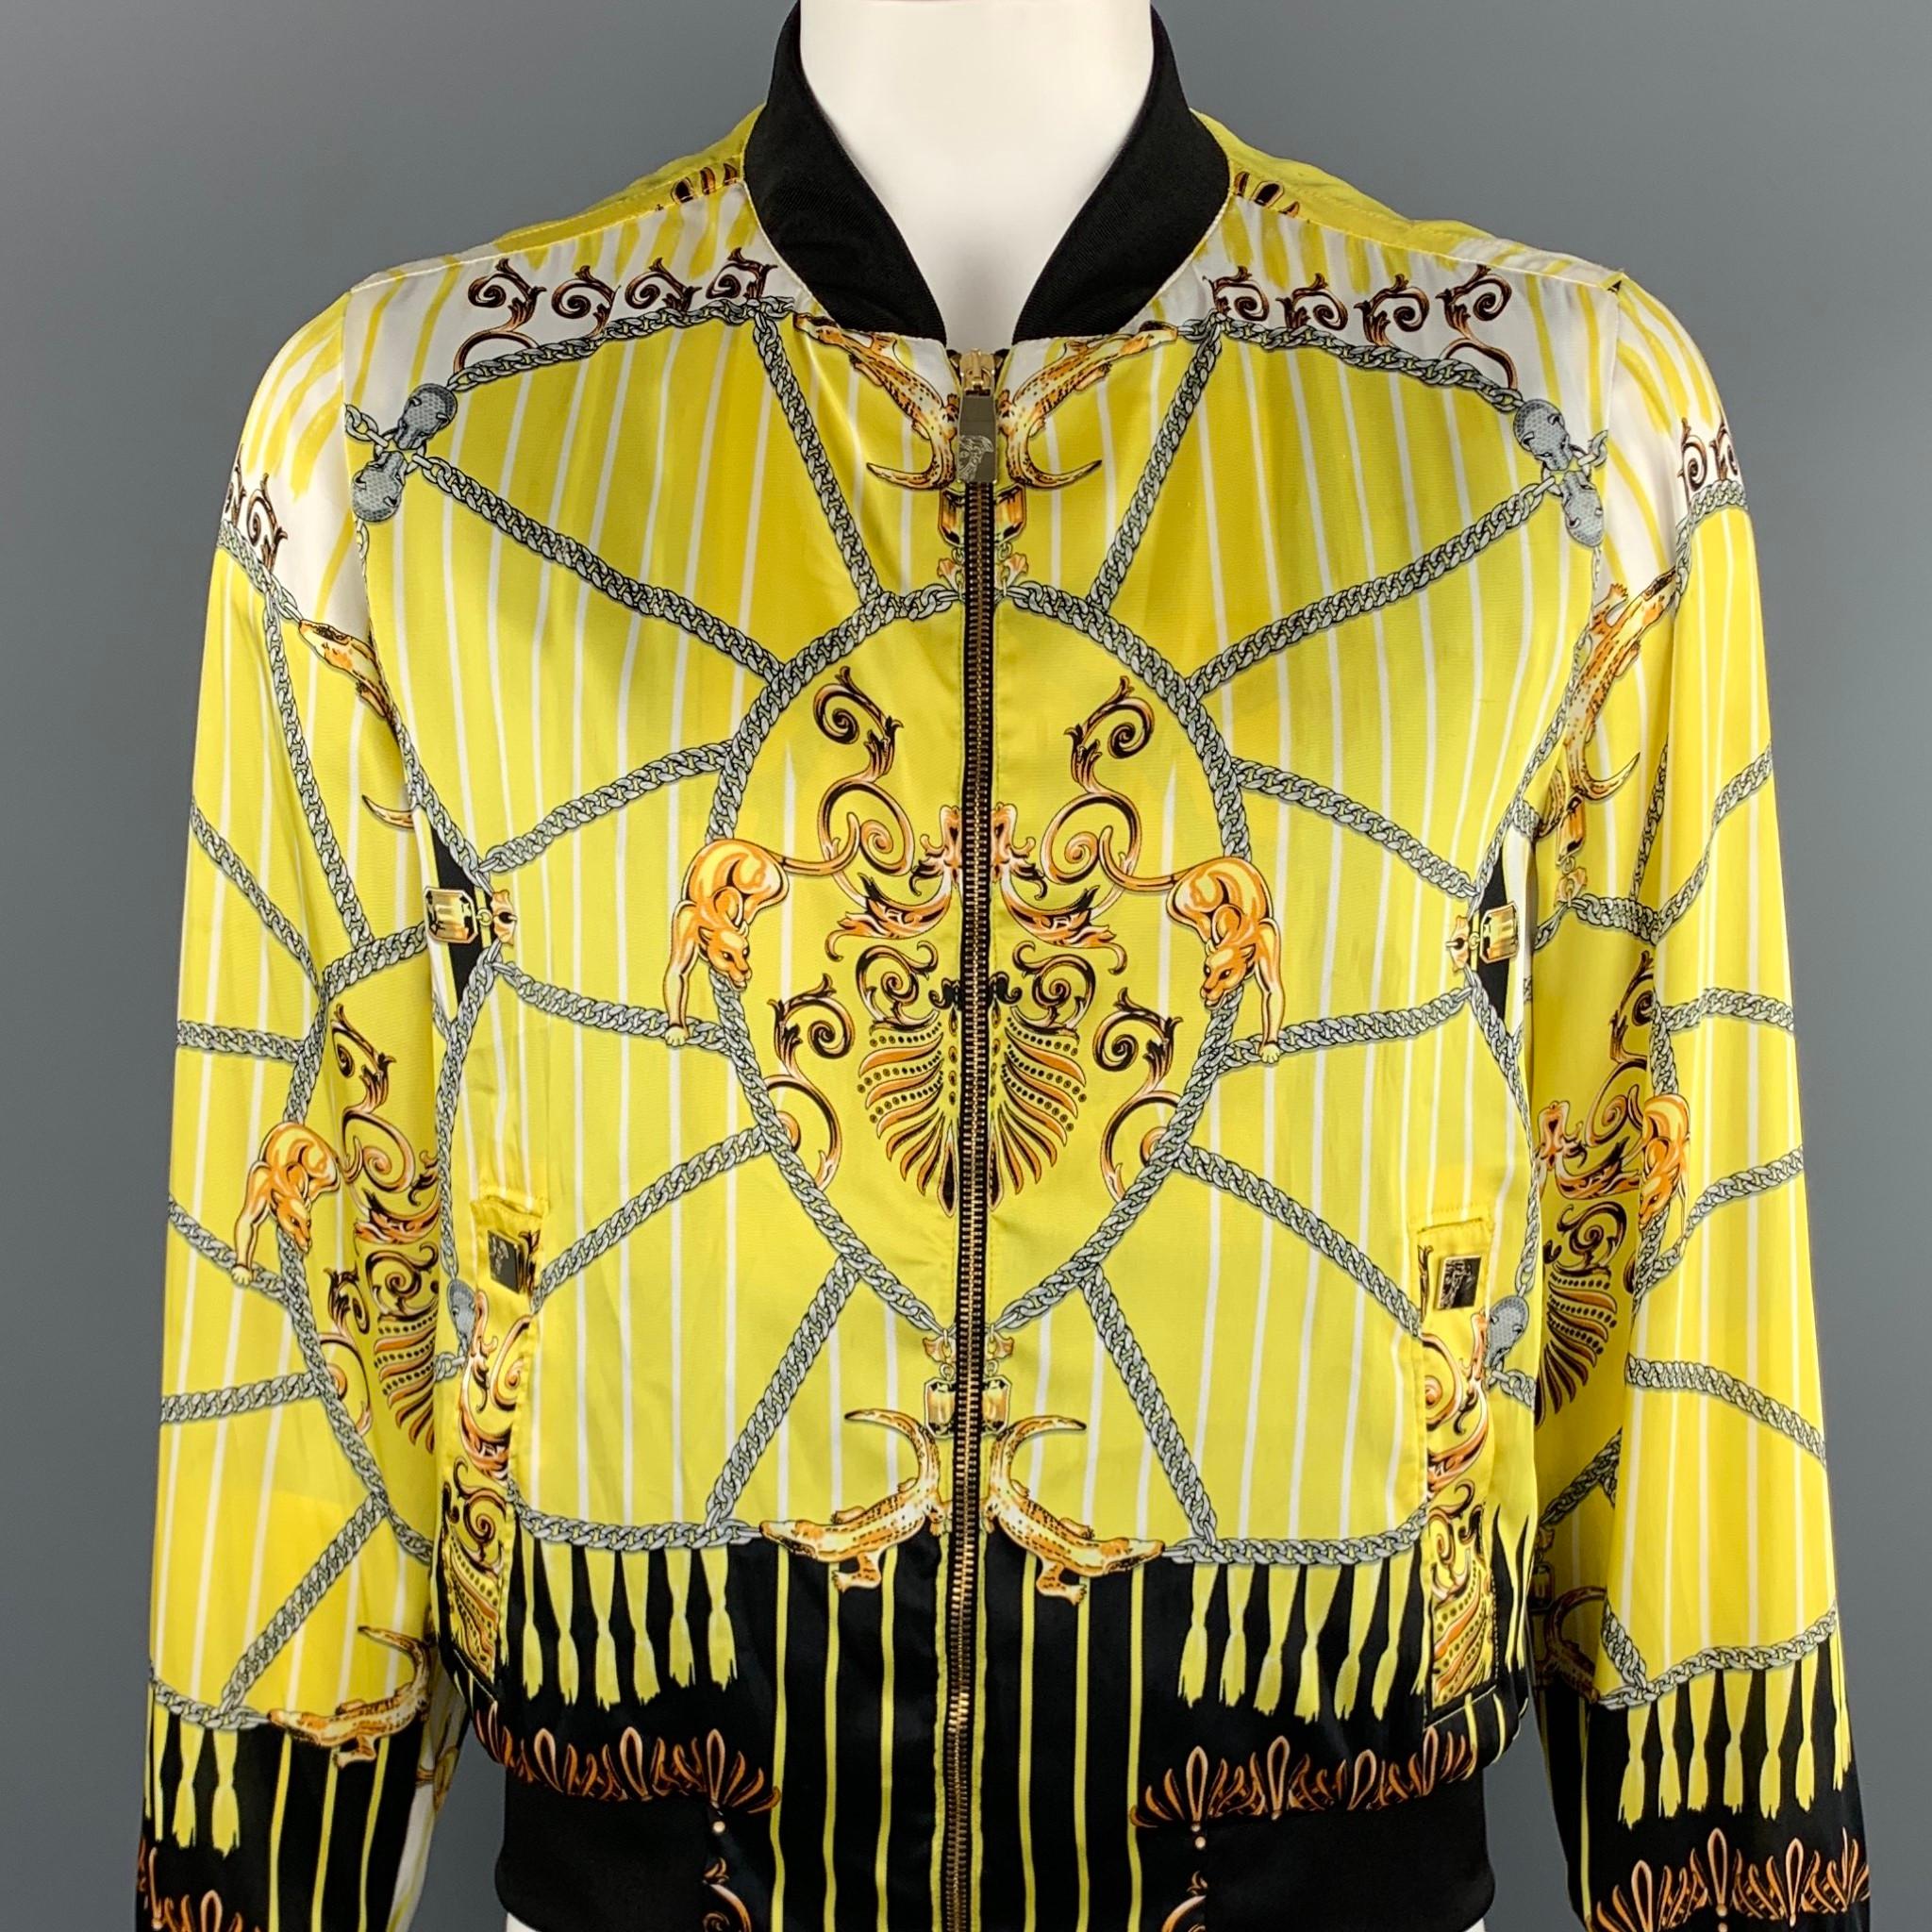 VERSACE COLLECTION jacket comes in a yellow & black print polyester featuring a bomber style and a full zip closure. Minor discoloration. As-Is. Made in Romania.

Good Pre-Owned Condition.
Marked: IT 52

Measurements:

Shoulder: 16 in. 
Chest: 42